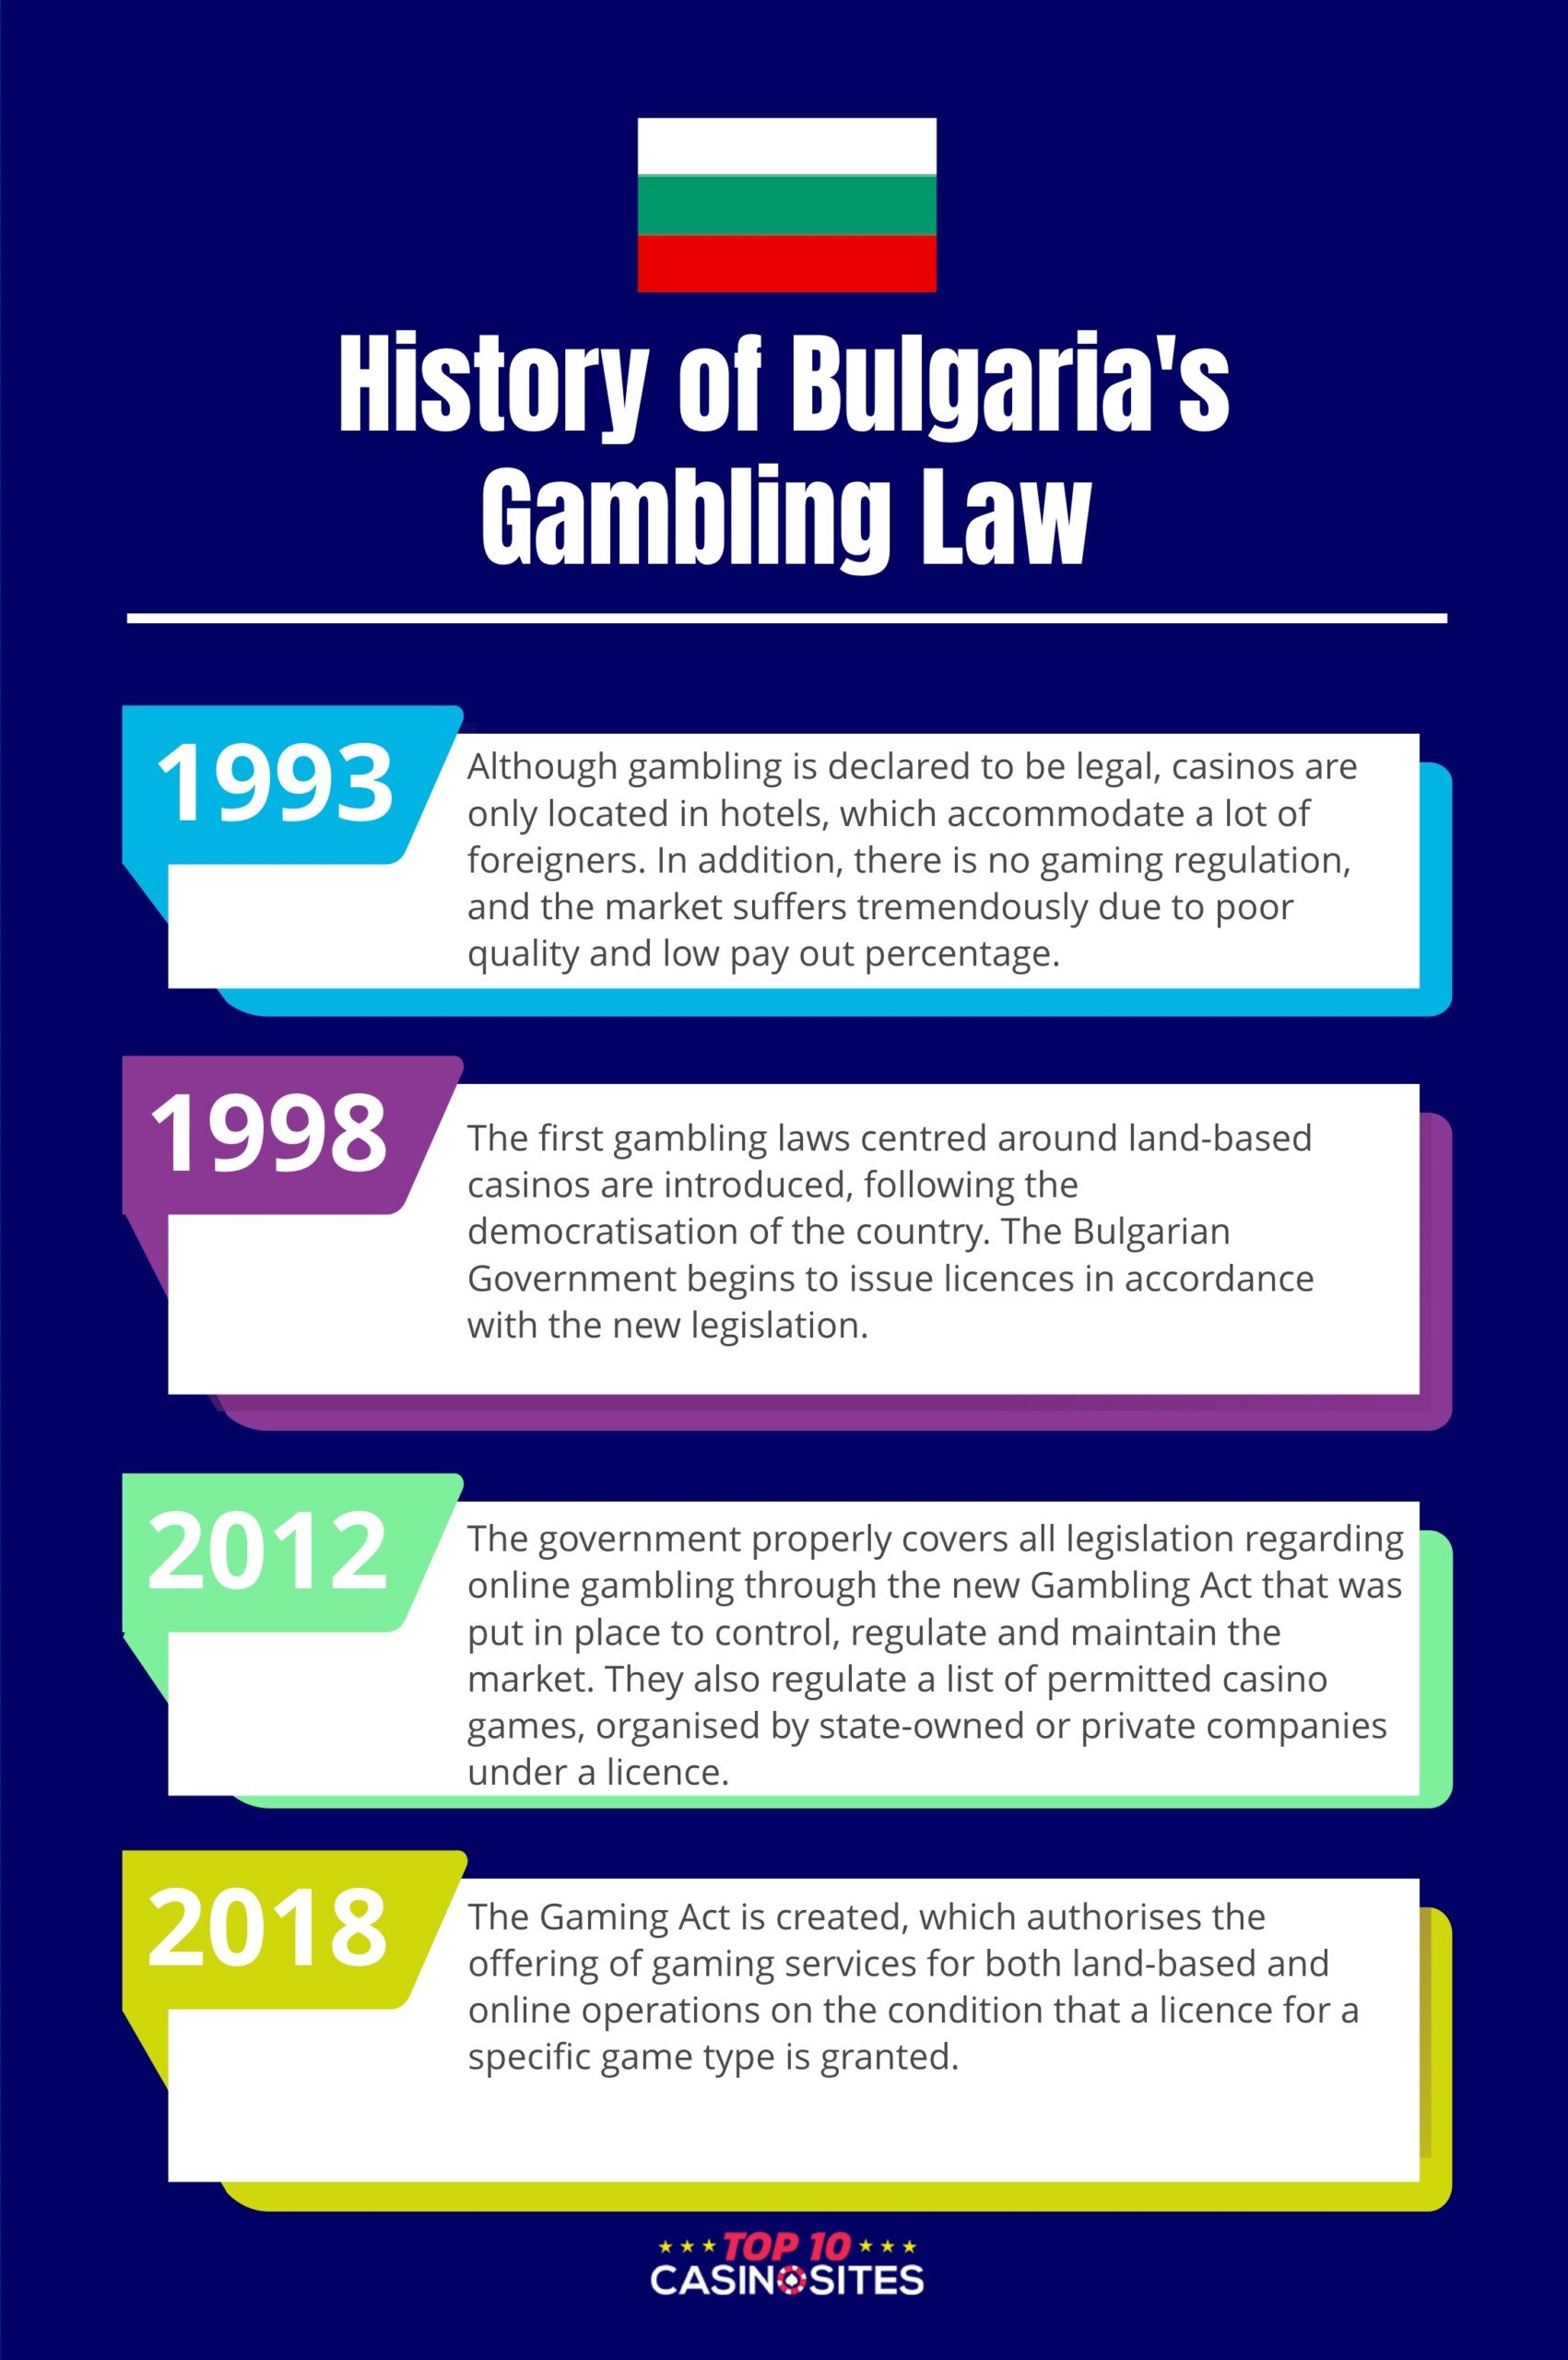 An infographic of the history of Bulgaria's Gambling Law